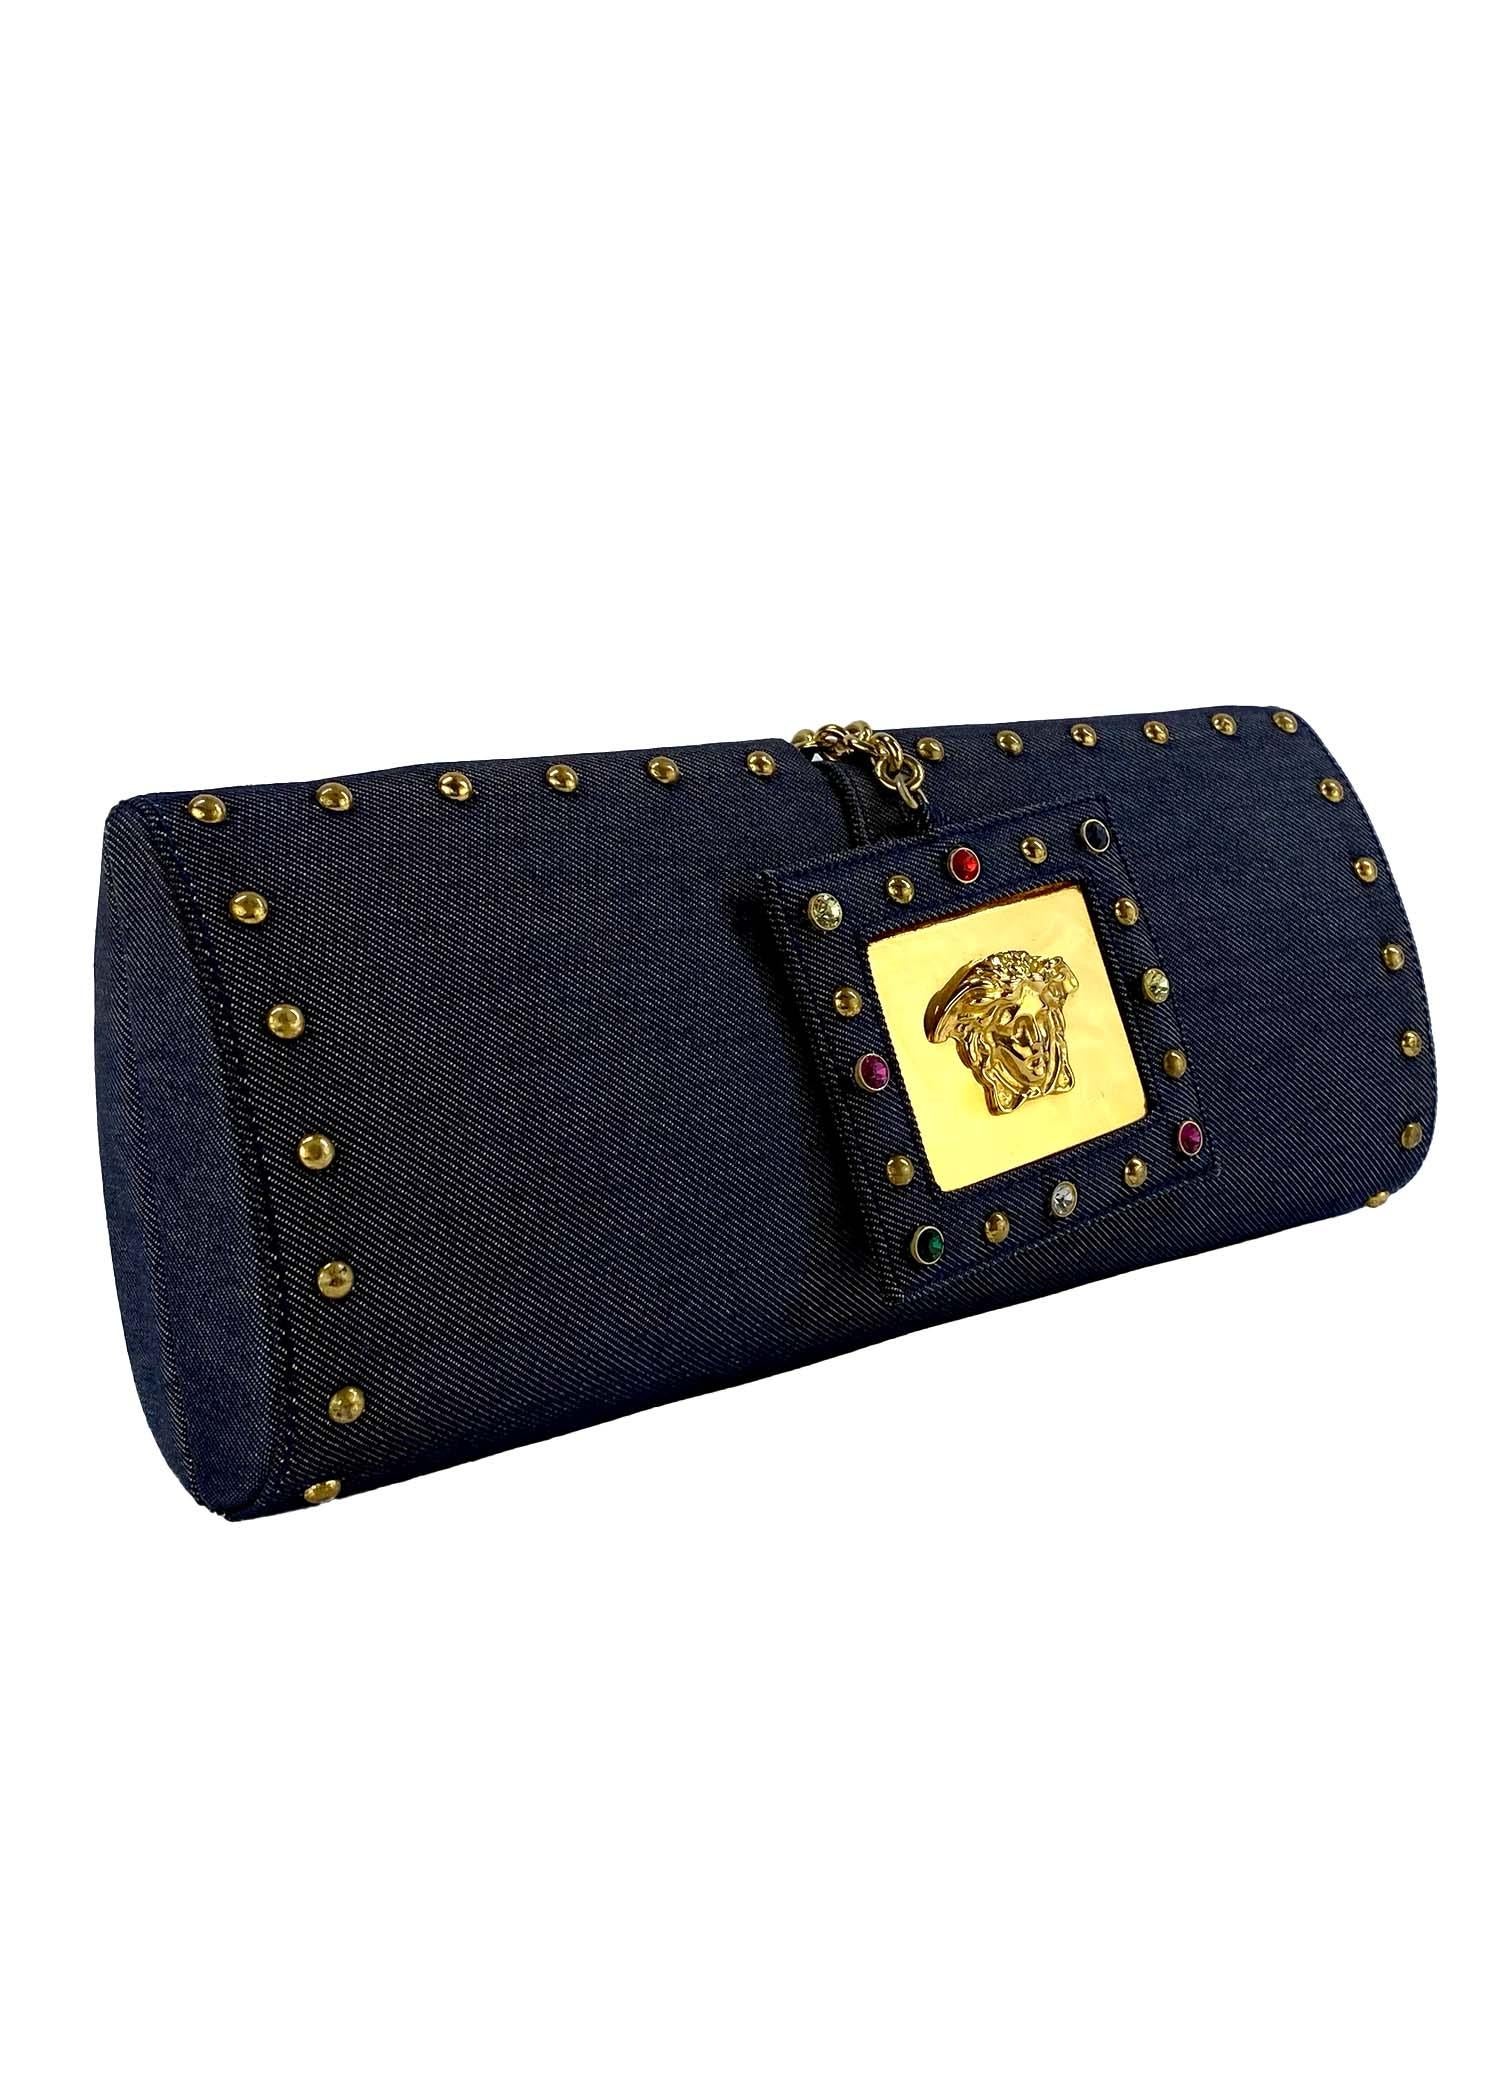 S/S 2000 Gianni Versace by Donatella Denim Medusa Jewel Clutch In Good Condition For Sale In West Hollywood, CA